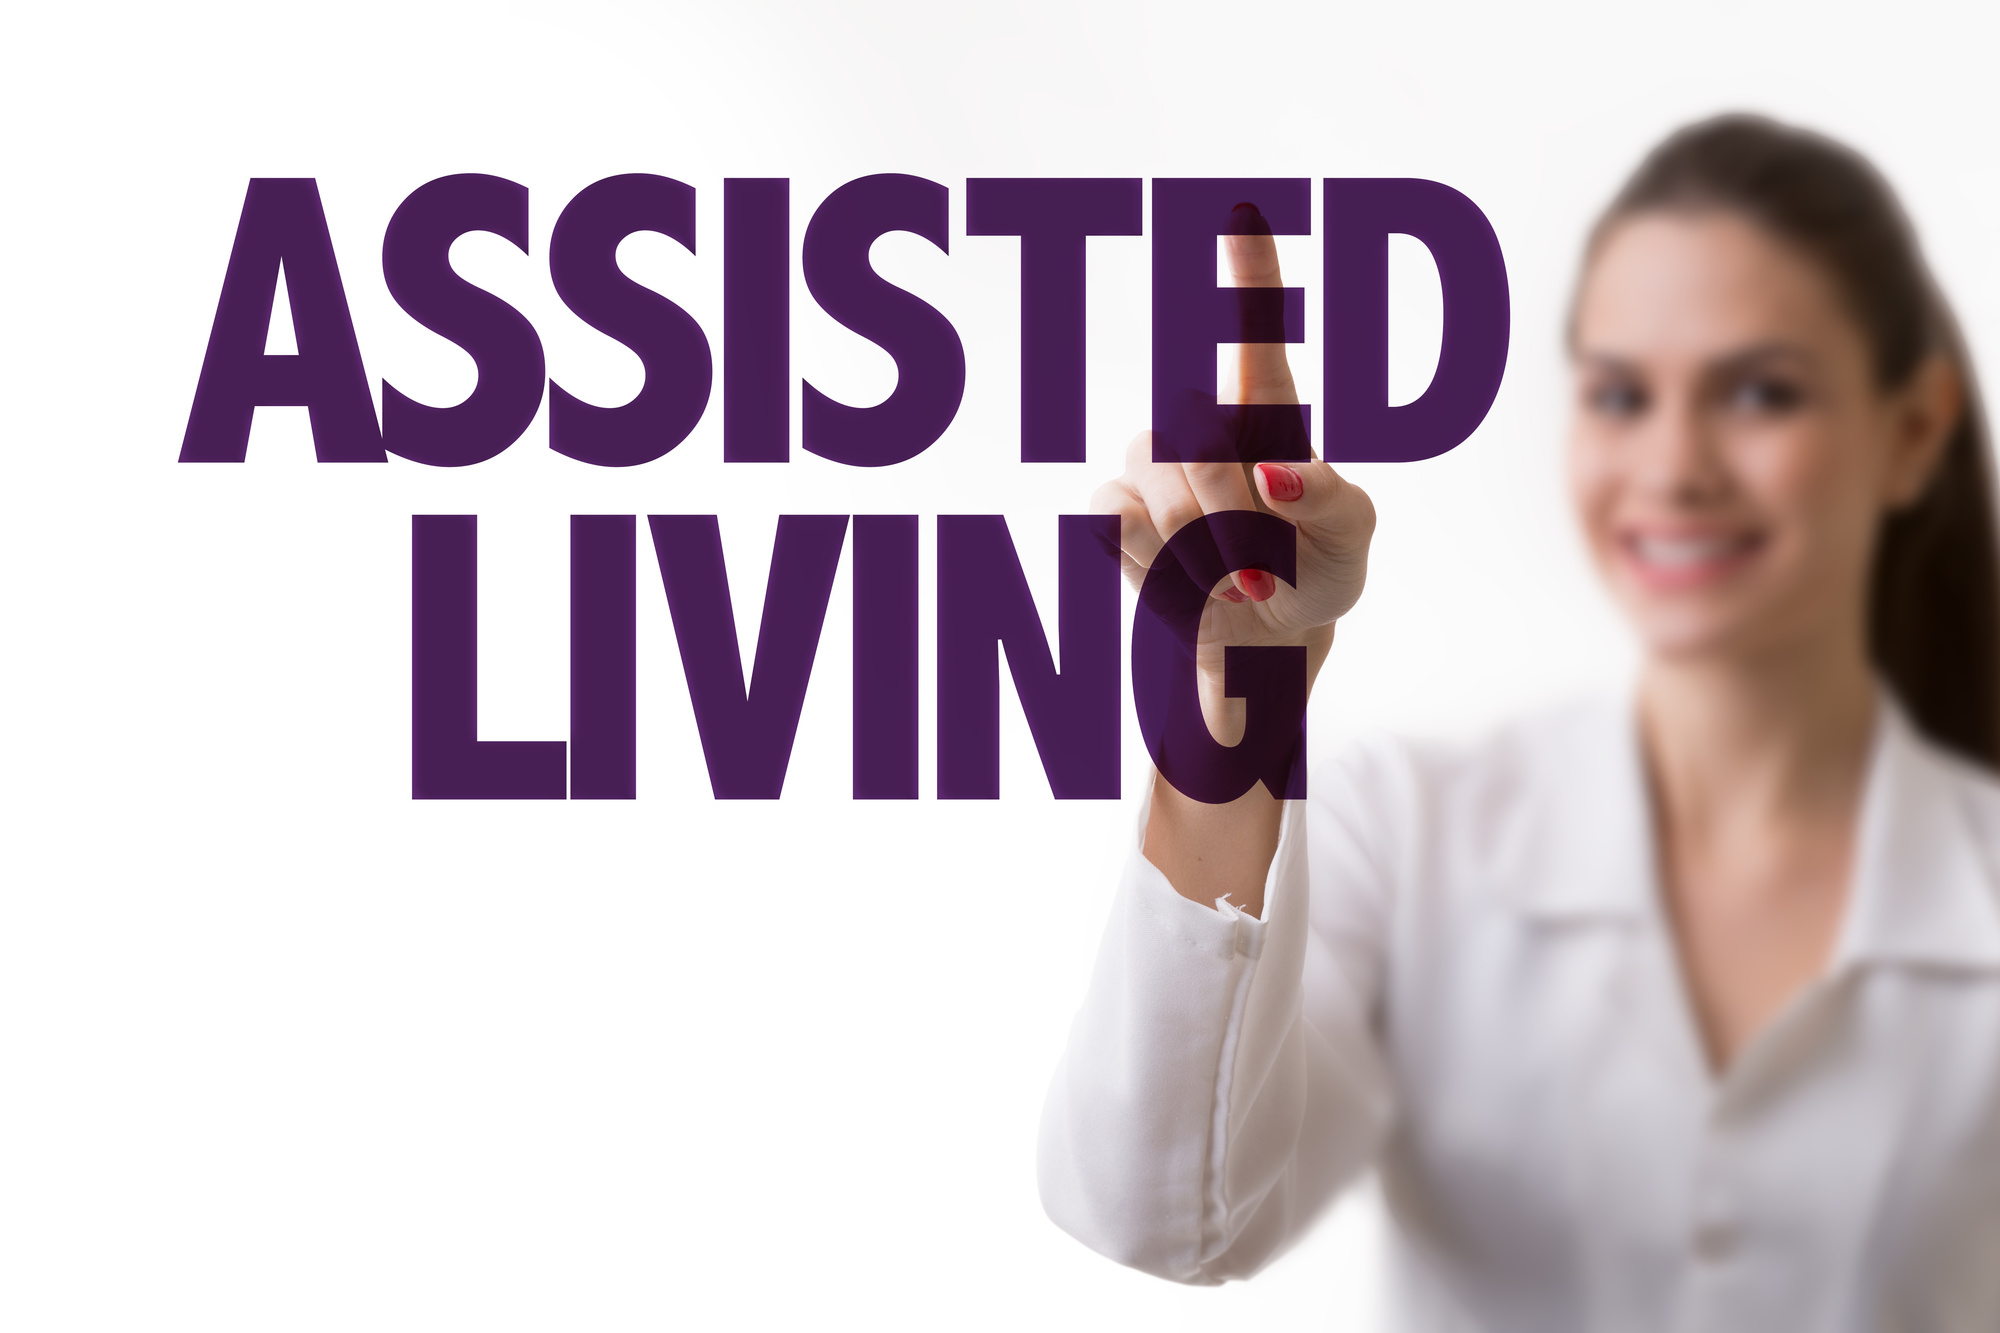 Assisted Living: 5 Things to Keep In Mind